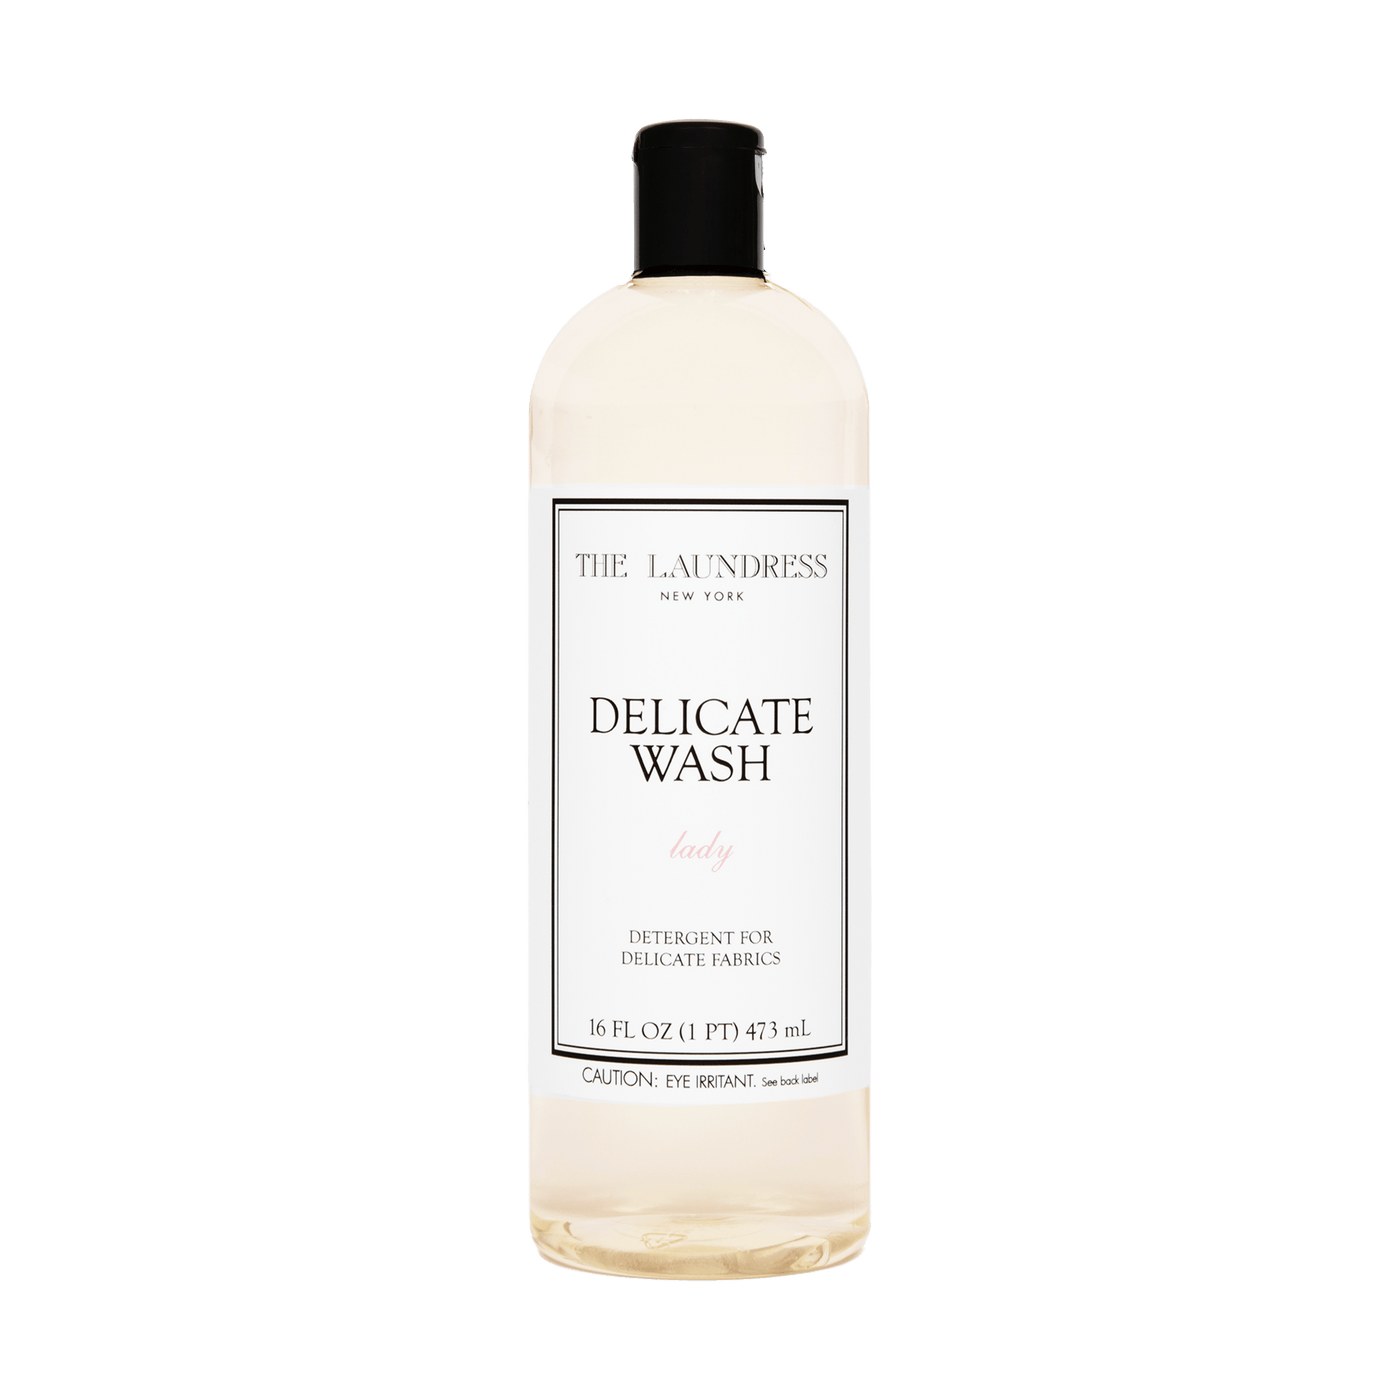 The Laundress Delicate Wash, a double concentrated detergent for delicate fabrics.